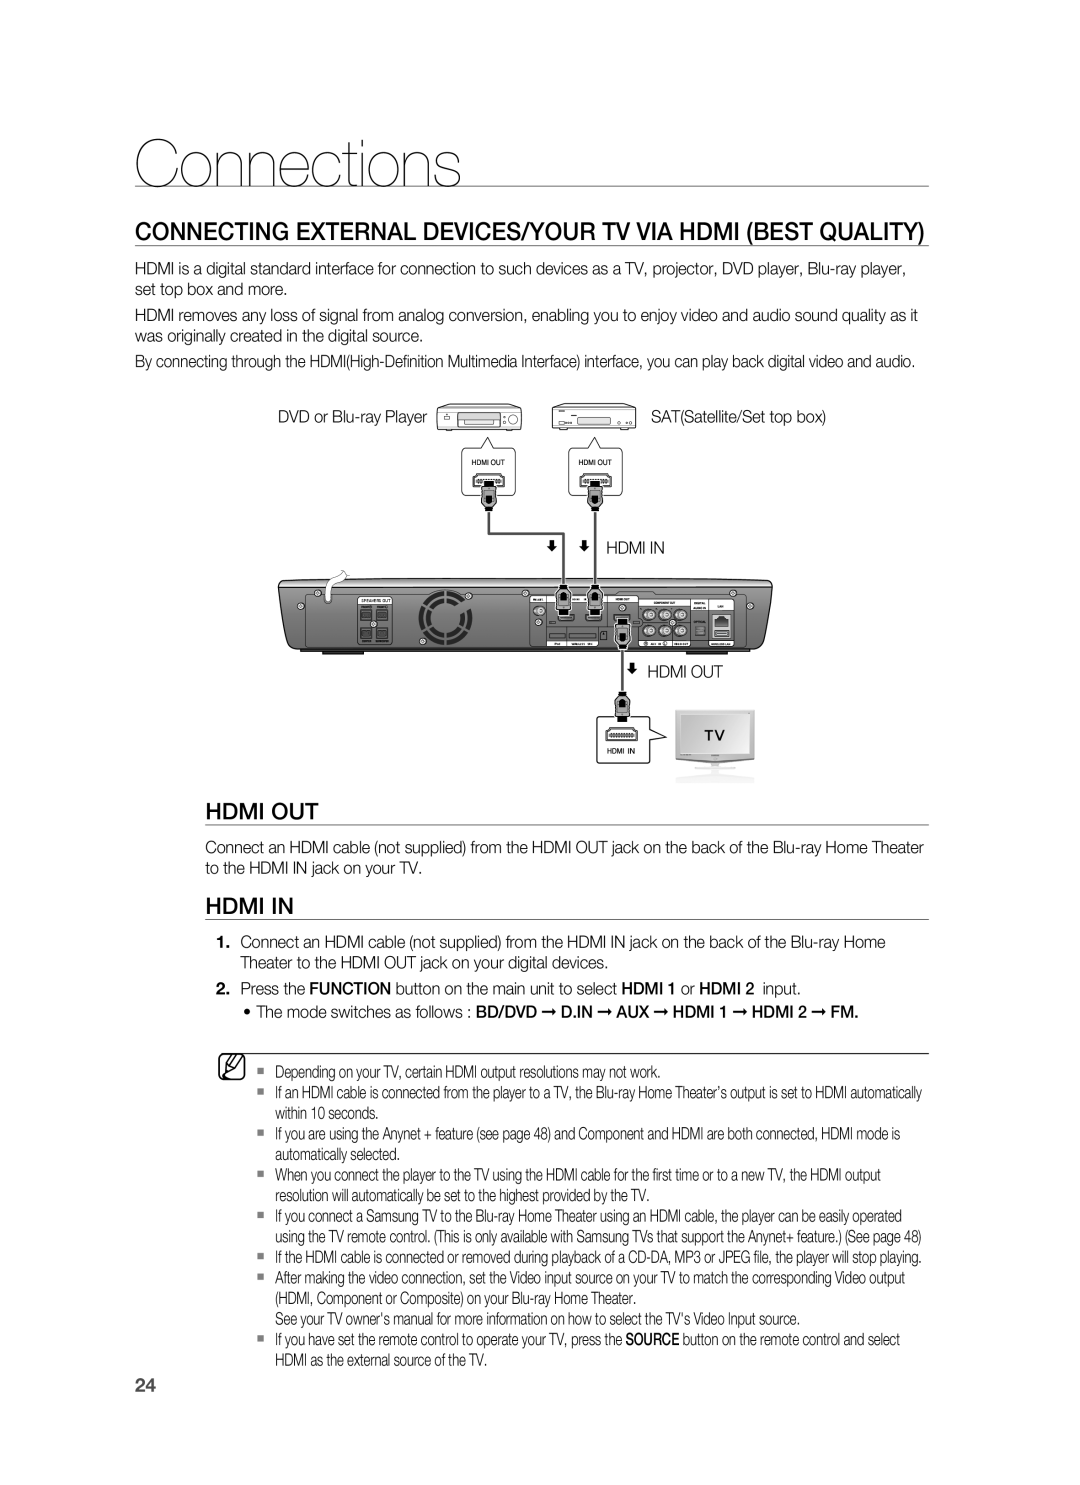 Samsung HT-BD3252 user manual Hdmi Out, Hdmi In, Connections 